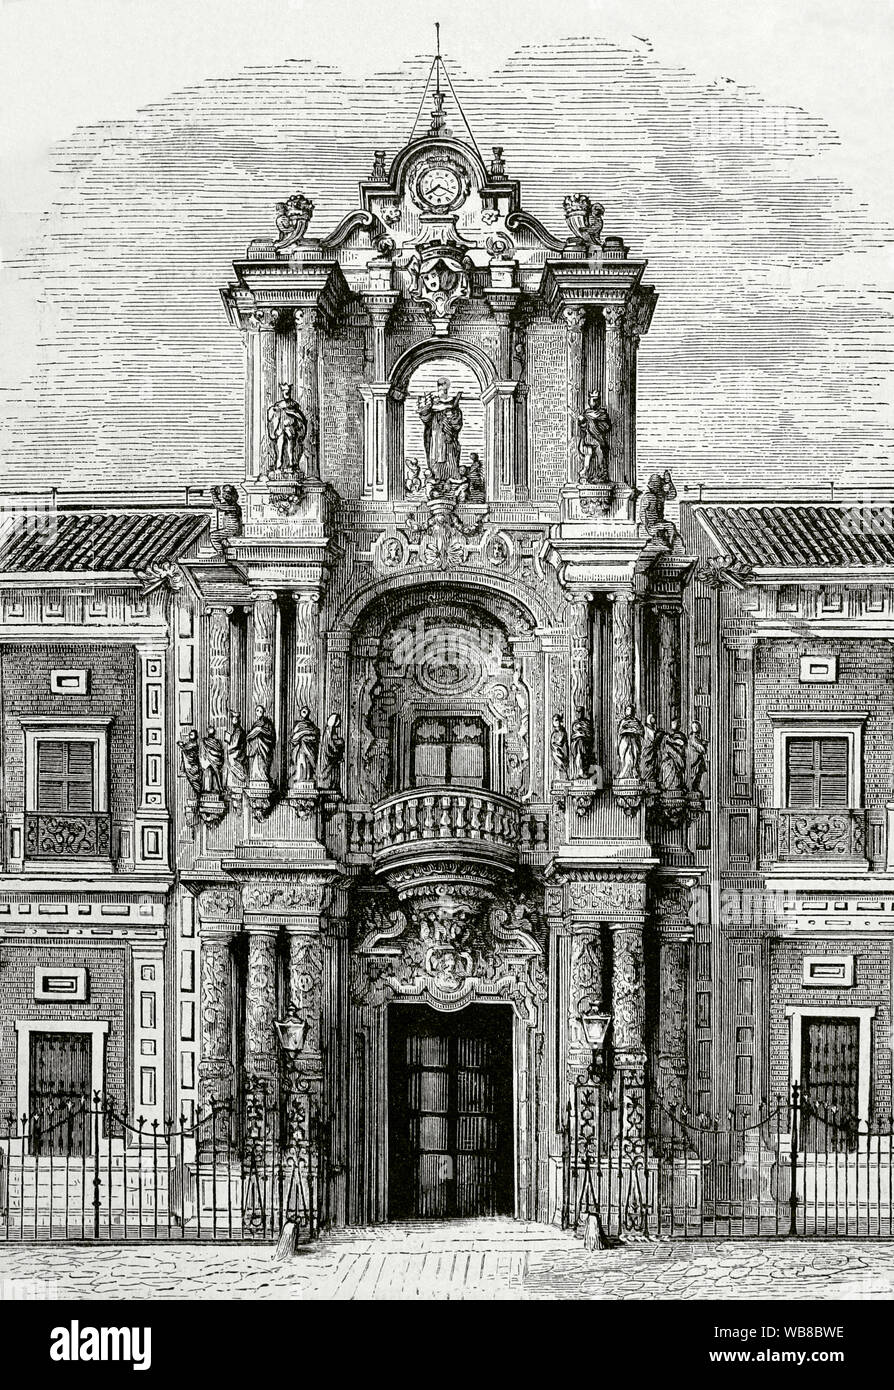 Spain, Andalusia, Seville. The Palace of San Telmo. It was built in 1682 in Baroque style. Churrigueresque portal on the main facade. Engraving. La Ilustracion Española y Americana, July 30, 1876. Stock Photo